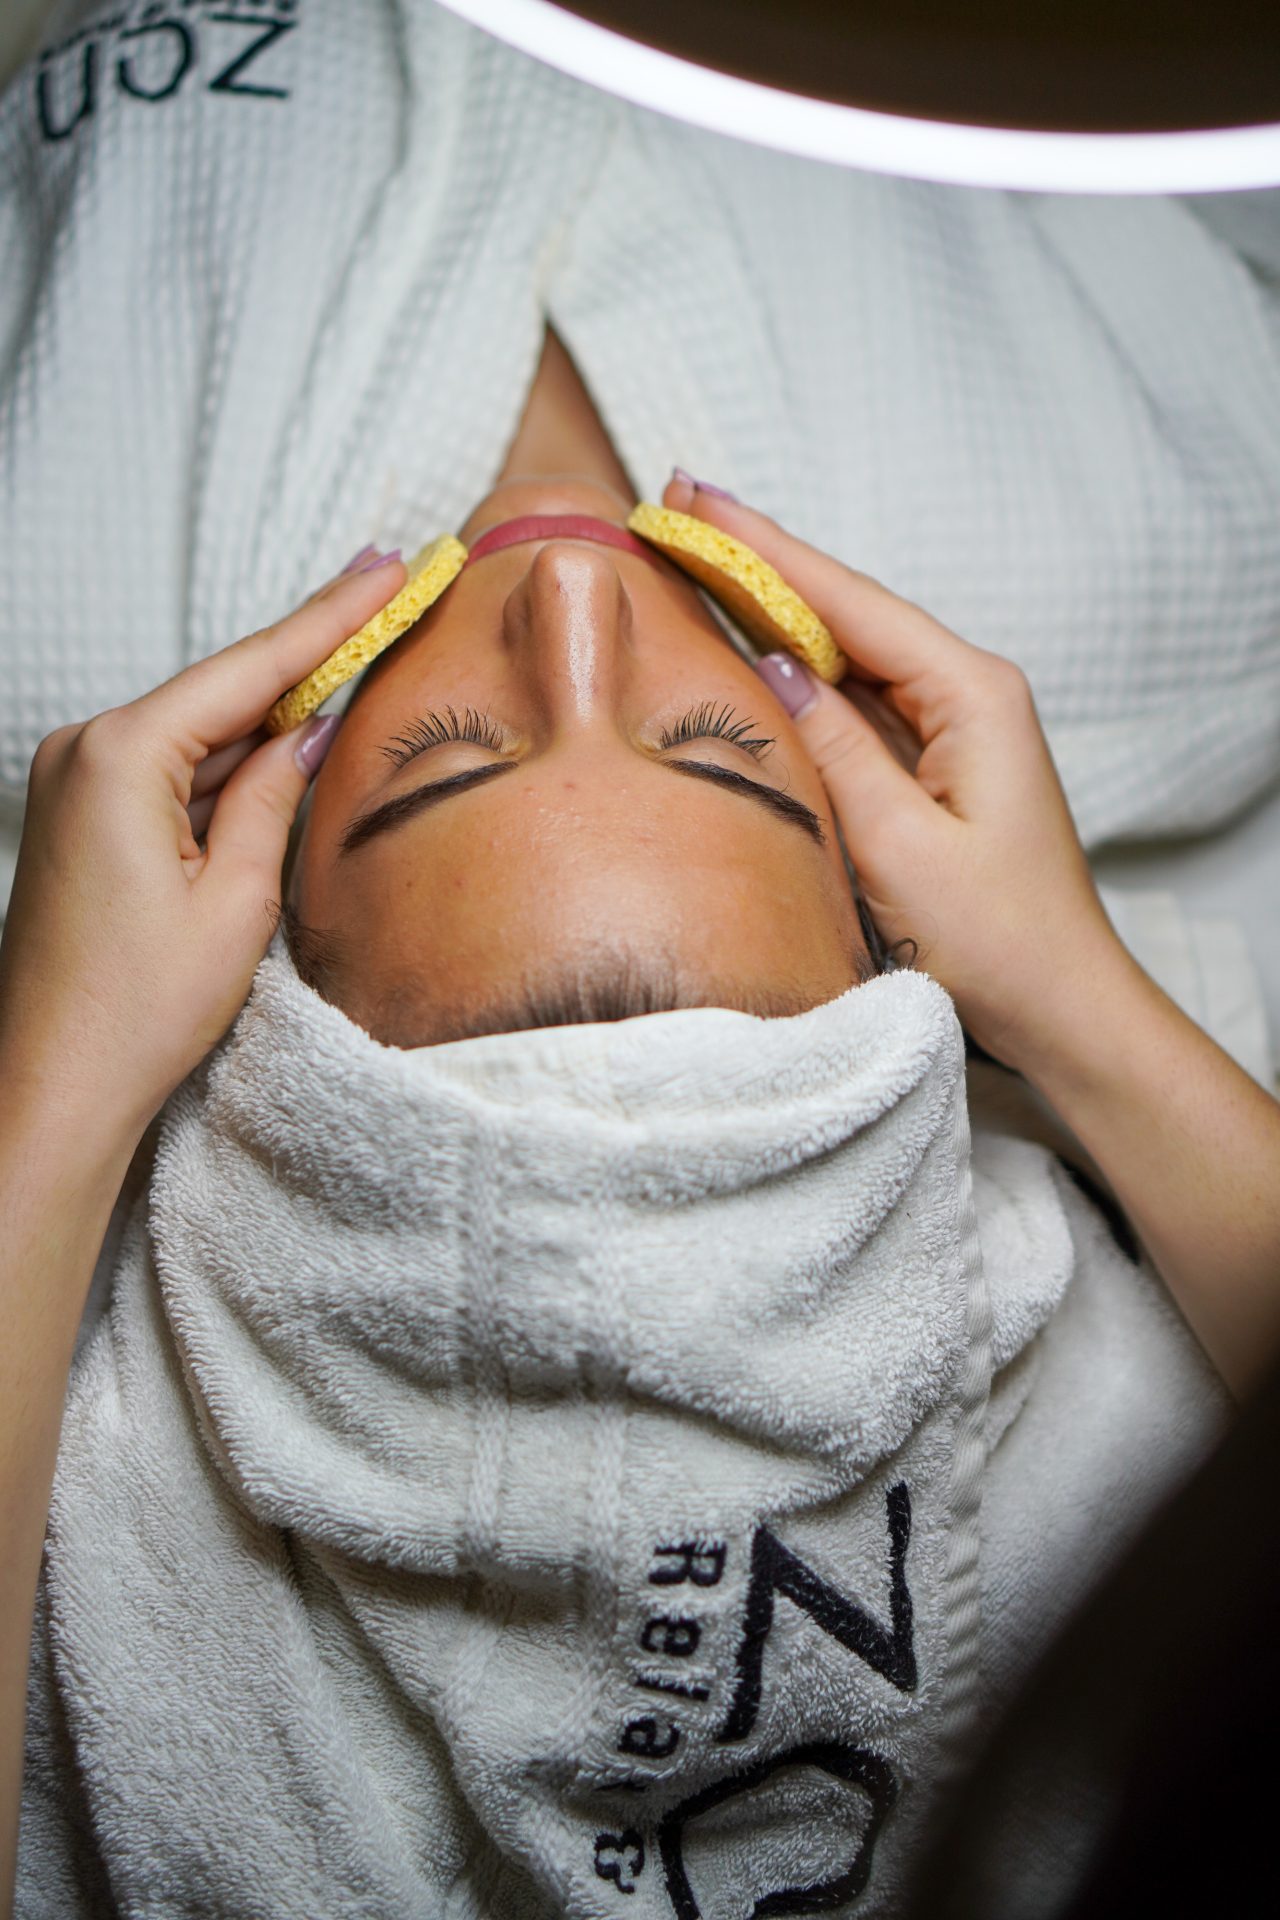 How Much Does a Beauty Therapist Earn?